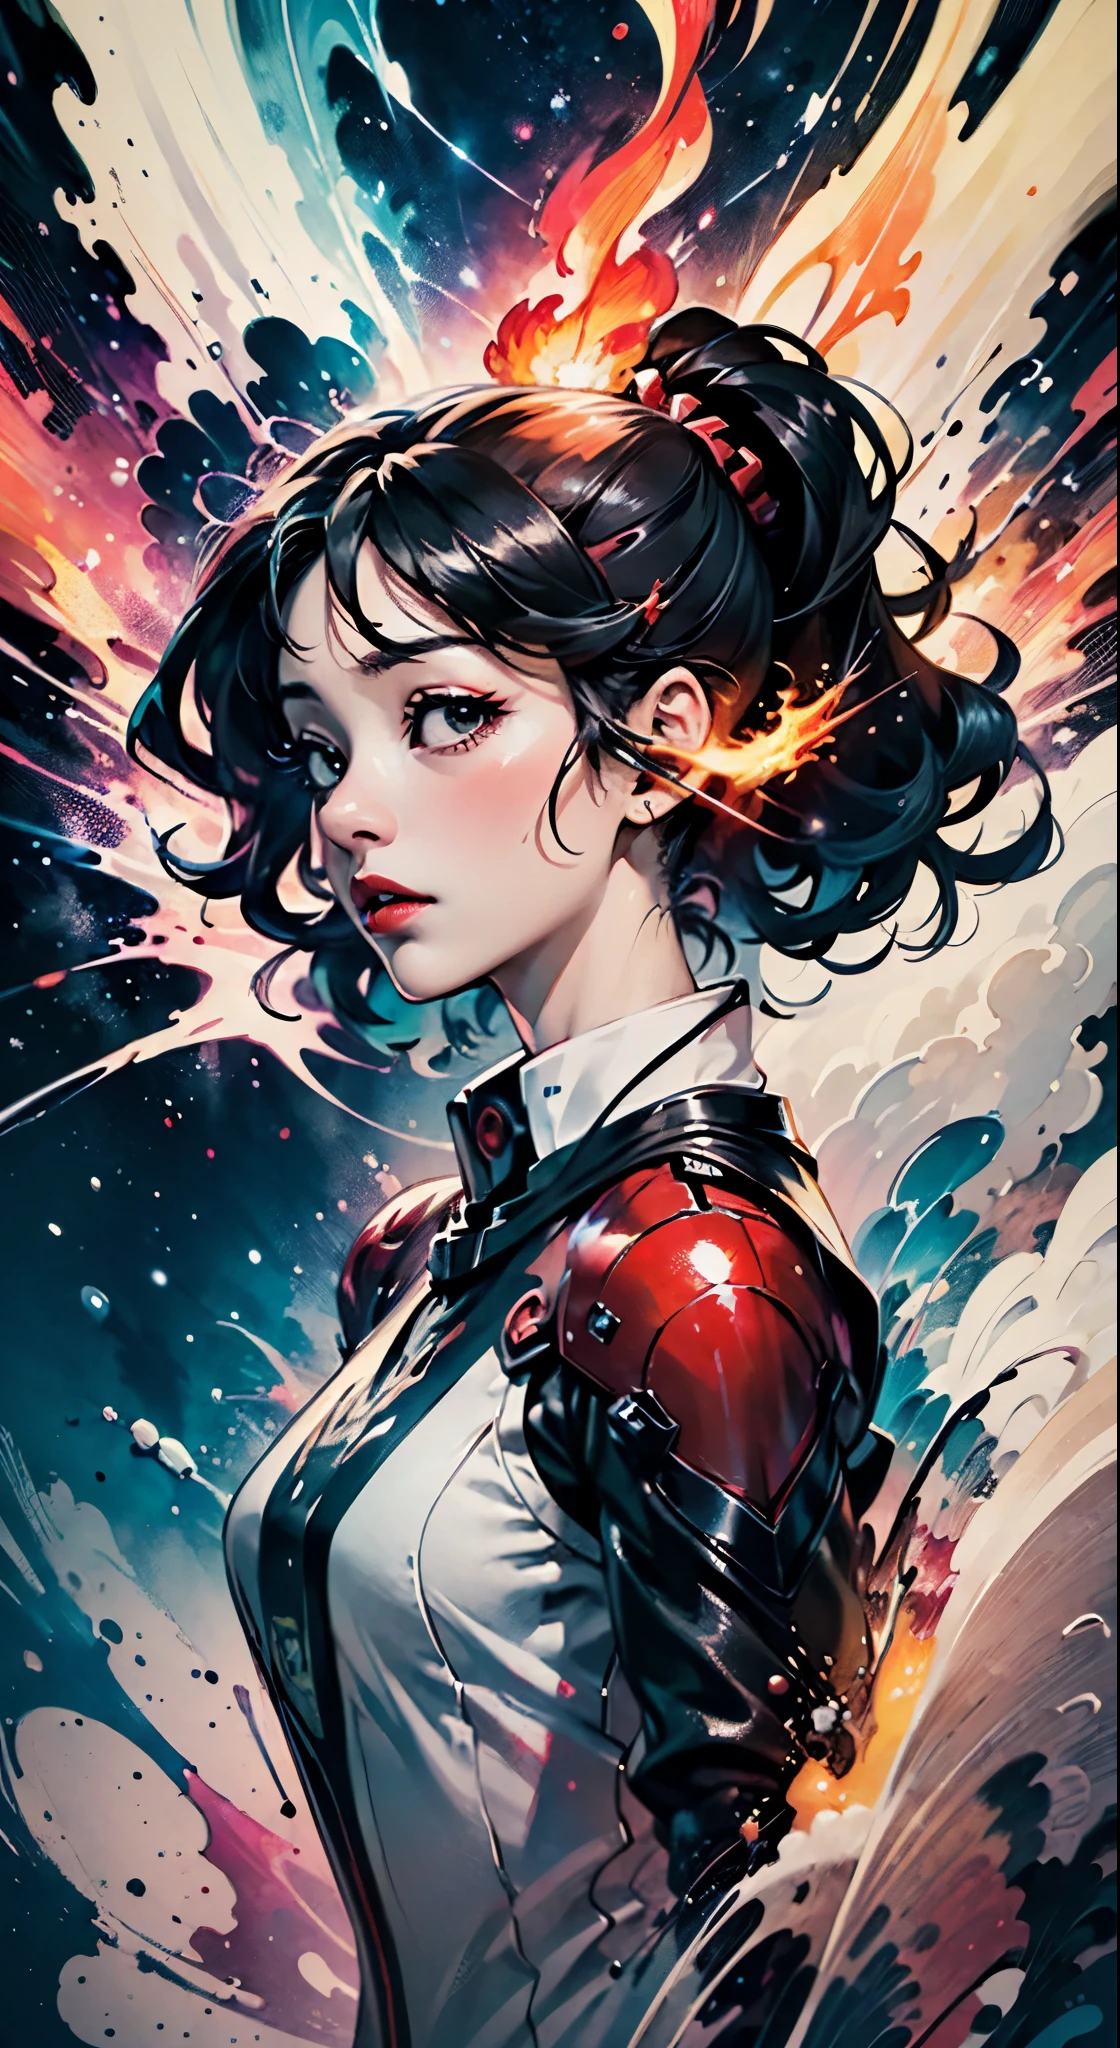 masterpiece, best quality, ultra high res, beautiful, elegant, graceful, award-winning art, 1girl , portrait, (style of Yuko Shimizu:1.1), (abstract art:1.2), red lips, silent in chaoodel pose in fashion show, style of rebecca guay, black hair, red fire , cloaked in flames, dark theme, visually stunning, gorgeous